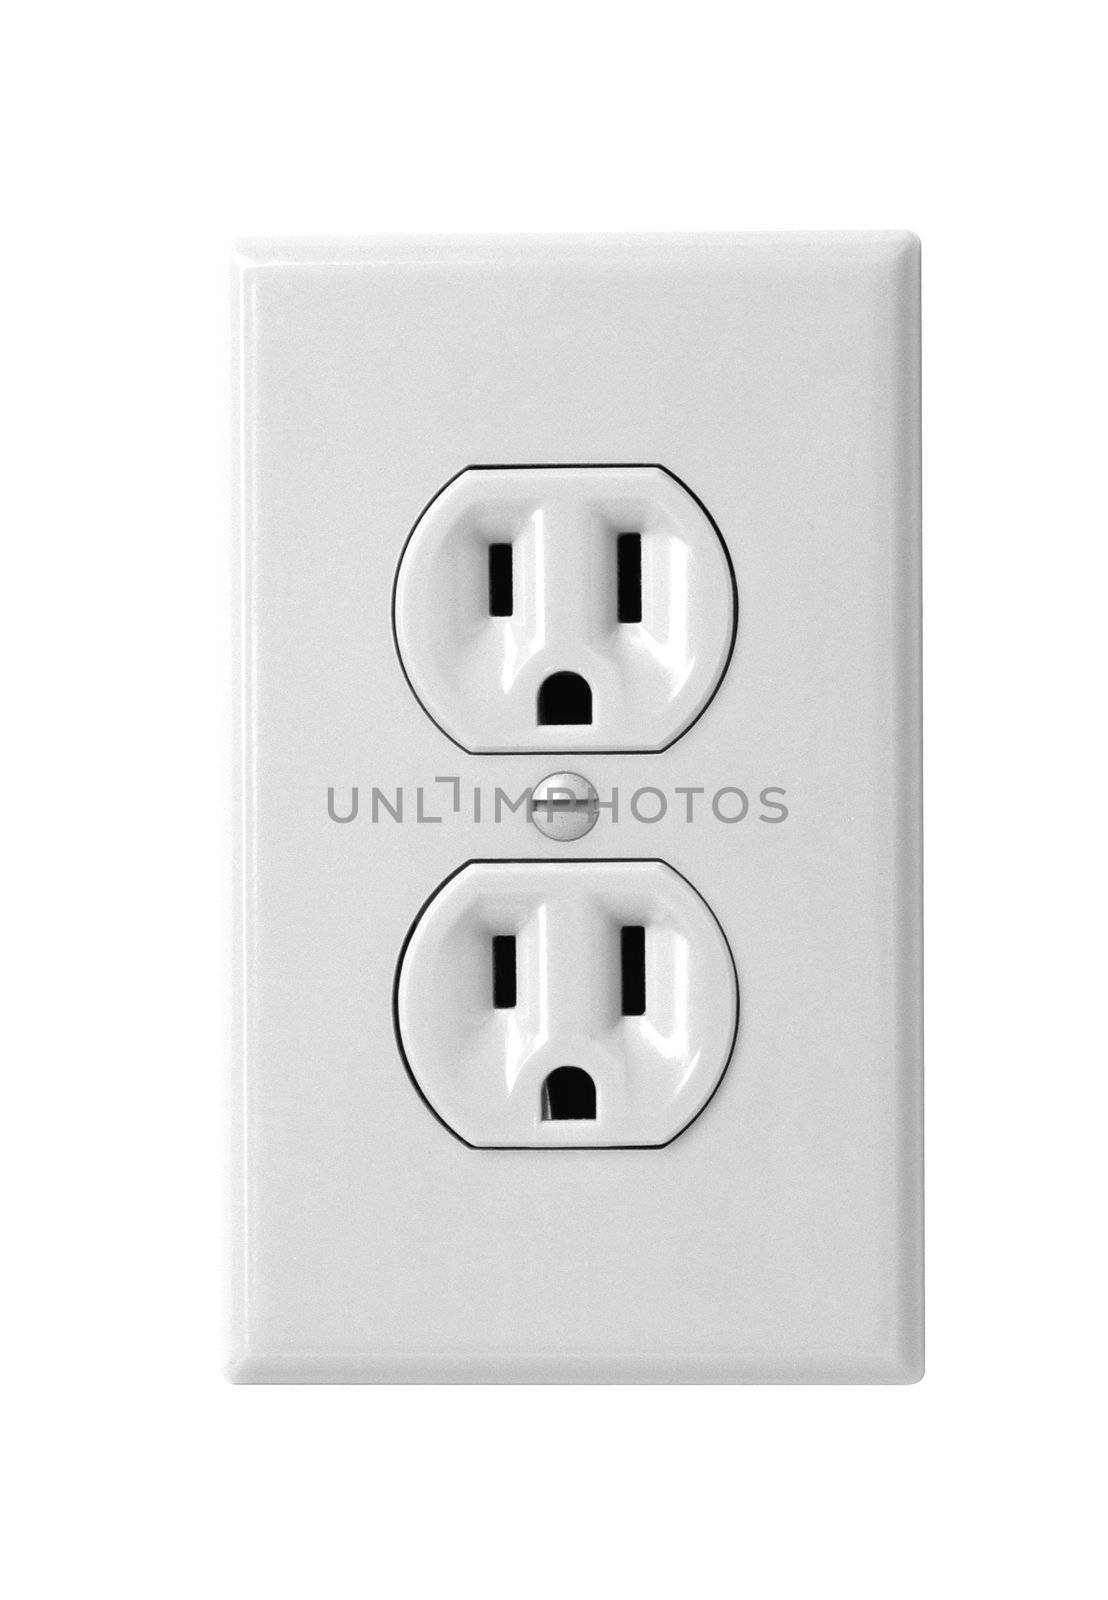 white electric wall outlet receptacle by shutswis